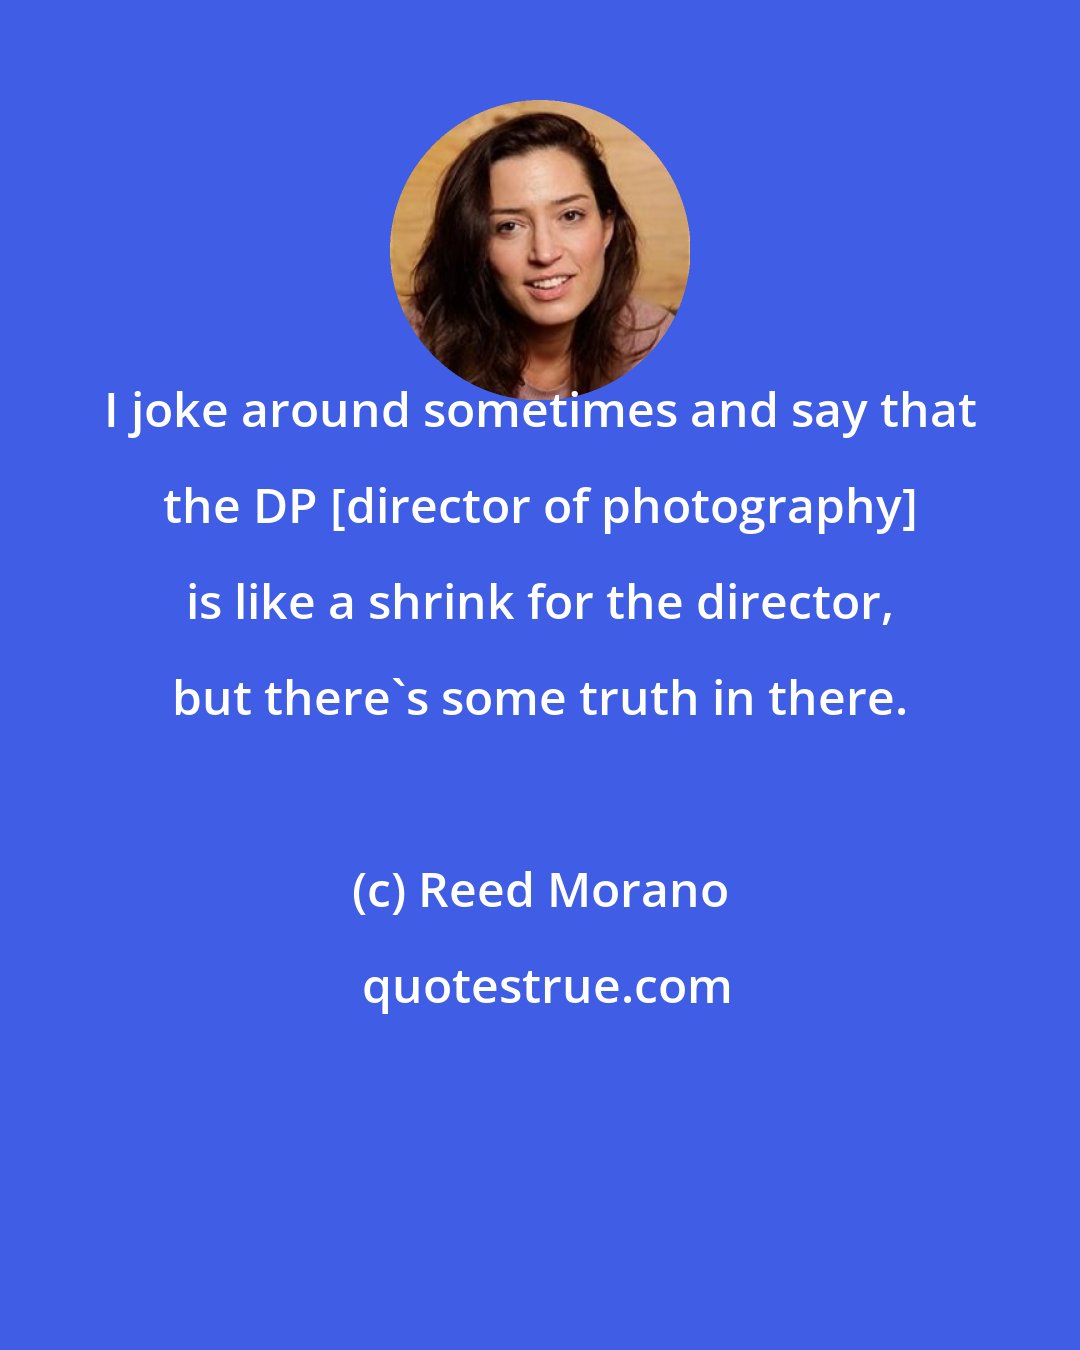 Reed Morano: I joke around sometimes and say that the DP [director of photography] is like a shrink for the director, but there's some truth in there.